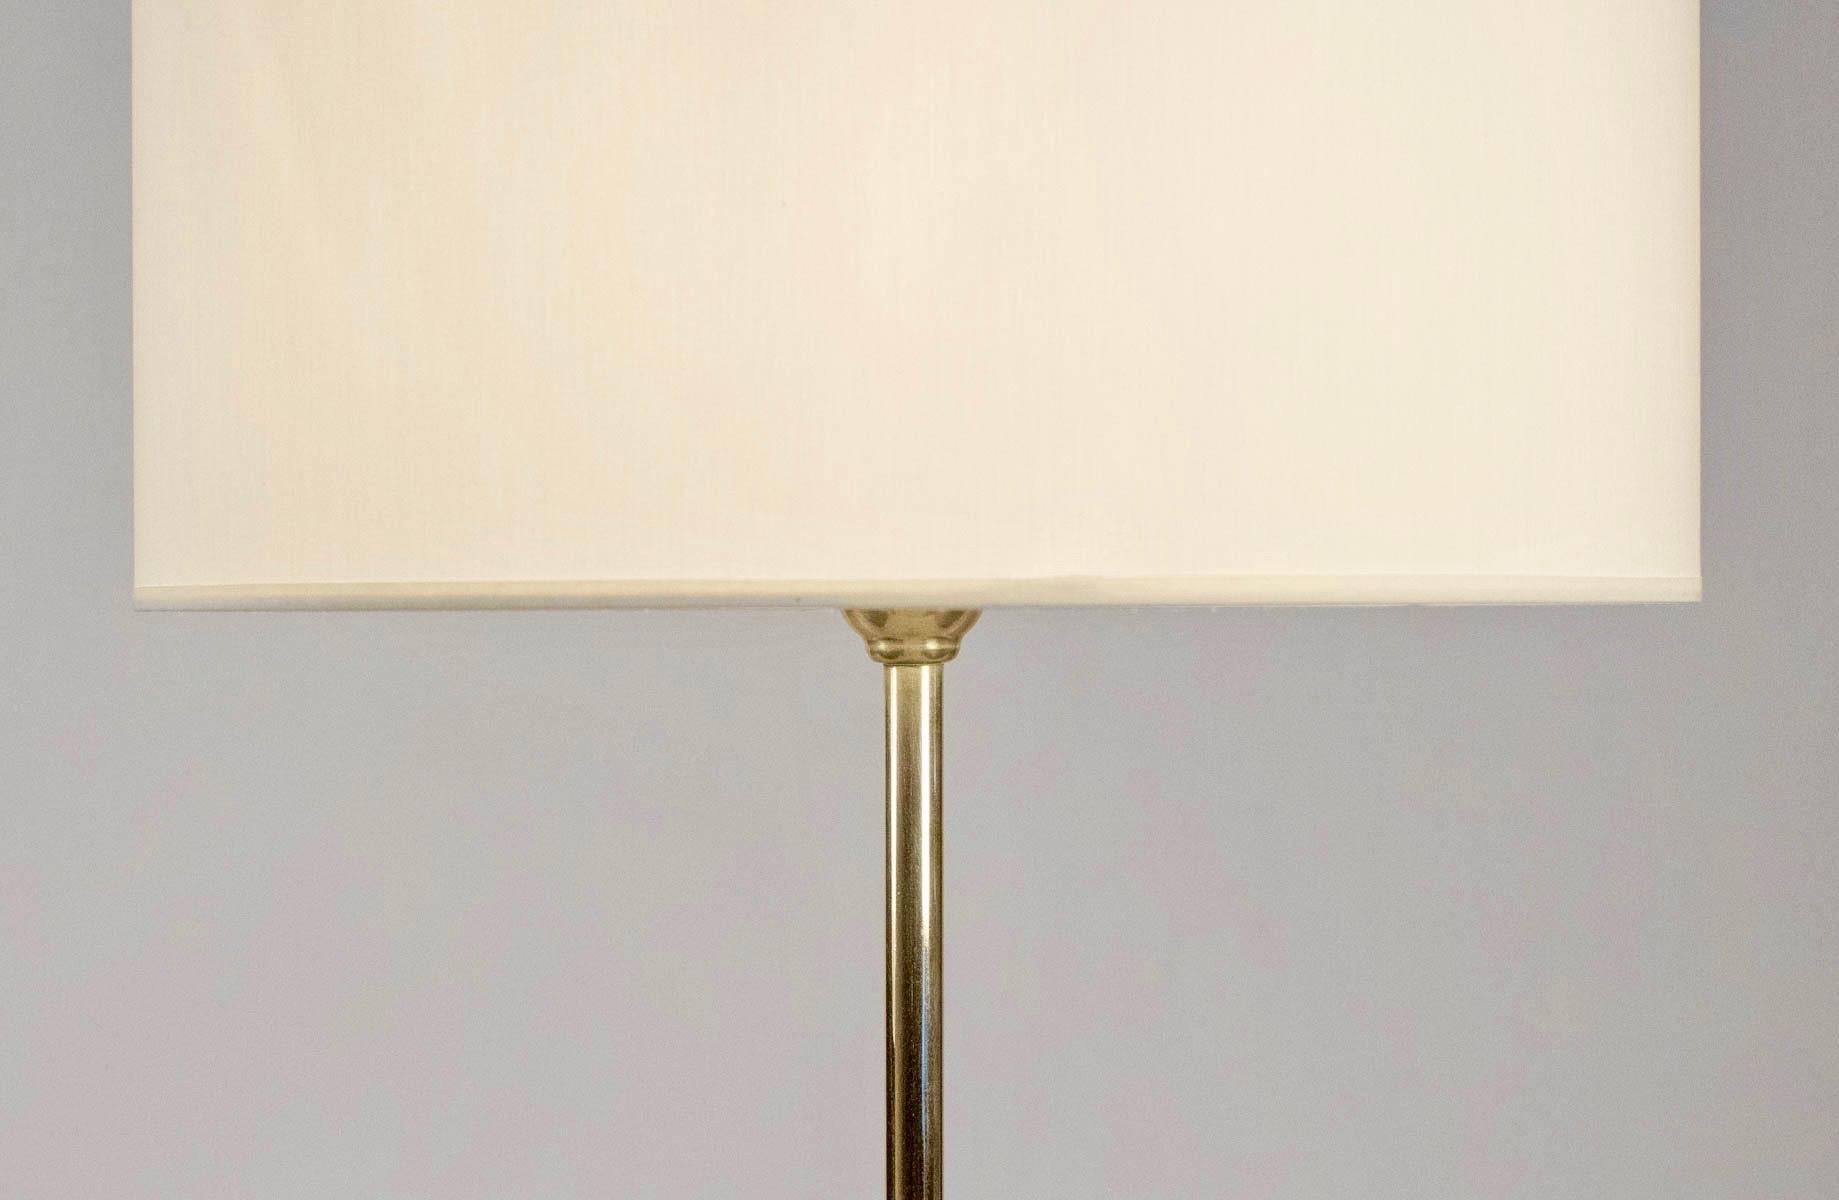 1950s Lunel floor lamp made of brass with a tripod base.
The three feet are black lacquered and ended by three brass balls.
Handmade shade of off white cotton.

One bulb.